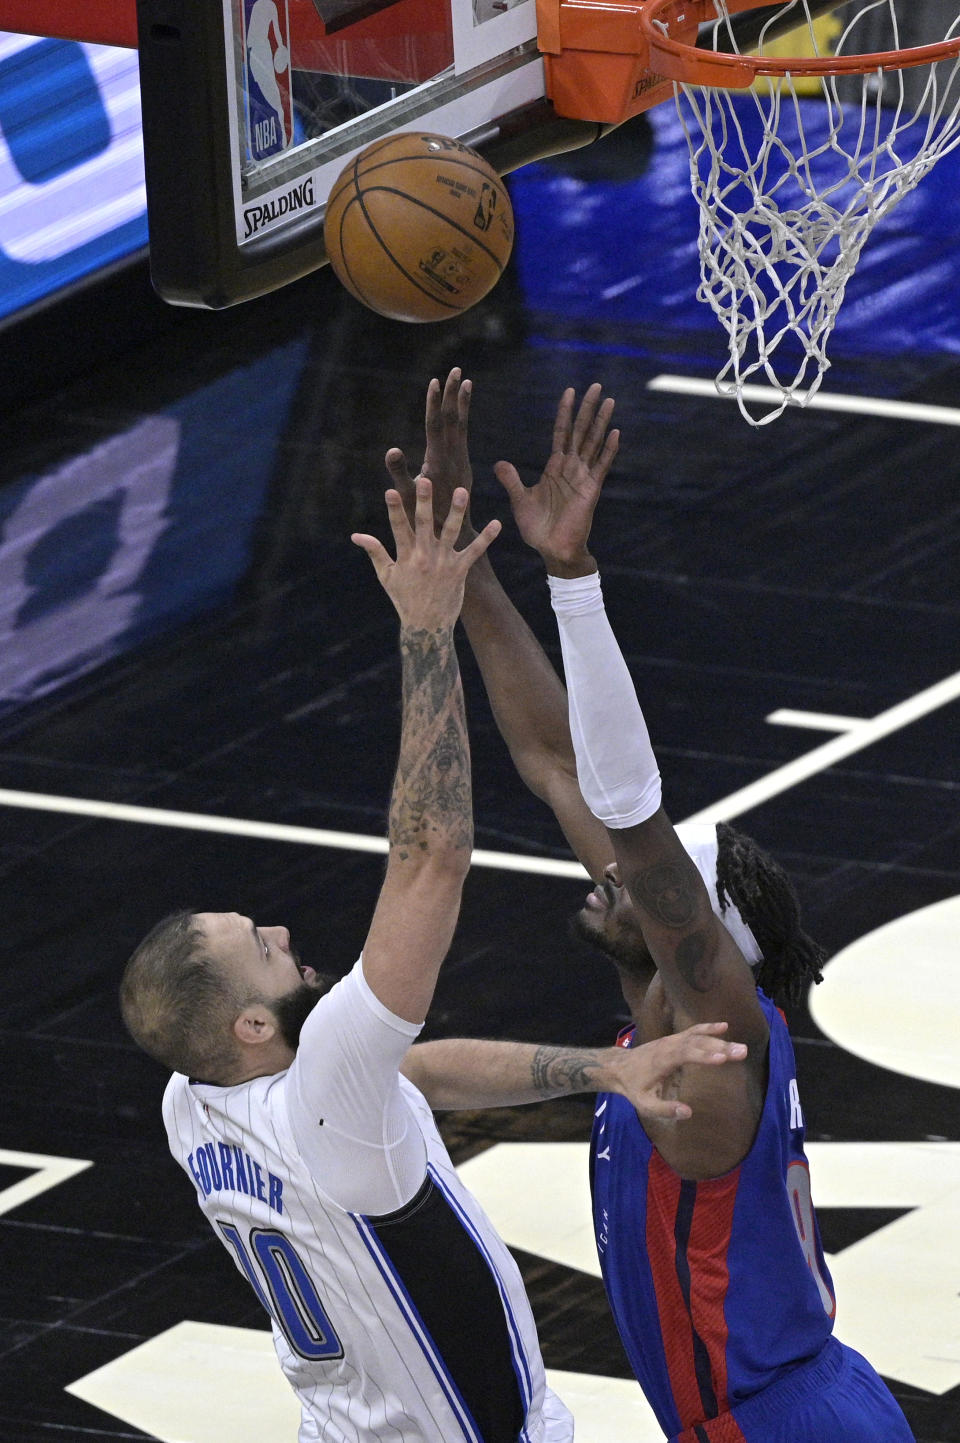 Orlando Magic guard Evan Fournier, left, is fouled by Detroit Pistons forward Jerami Grant, right, while going up for a shot during the first half of an NBA basketball game, Tuesday, Feb. 23, 2021, in Orlando, Fla. (AP Photo/Phelan M. Ebenhack)